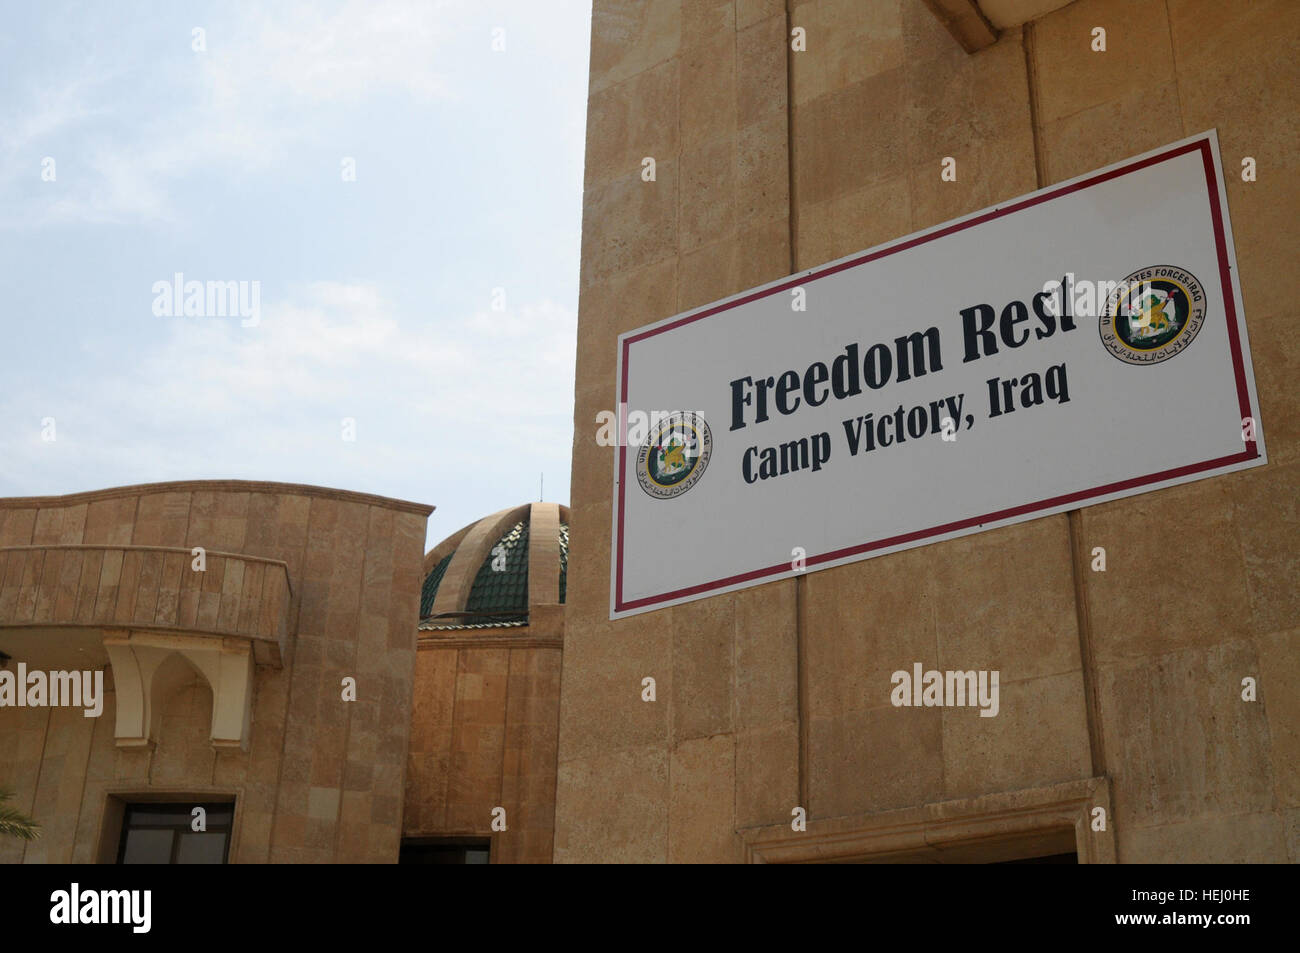 Freedom Rest is designed as a place for Soldiers in Iraq, who may not have time to go on pass to Qatar, to rest and recuperate. Freedom Rest Offers Service Members Place to 'get away' 265726 Stock Photo